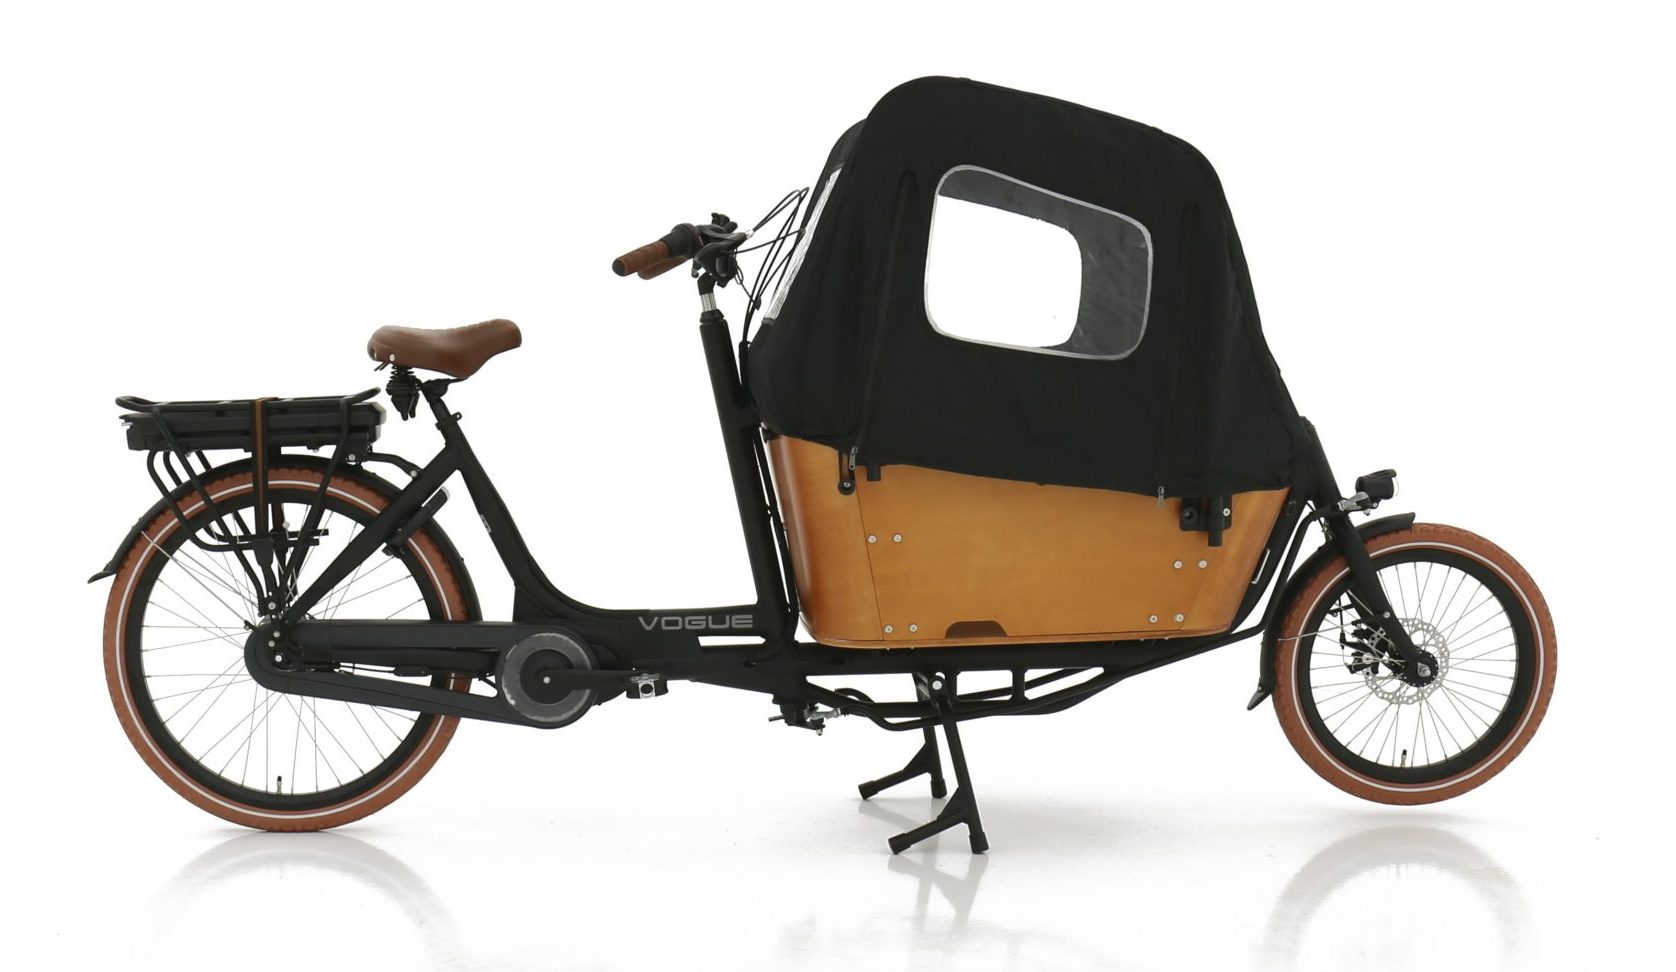 Vogue e-bakfiets Carry 2 - Bikes in Groningen